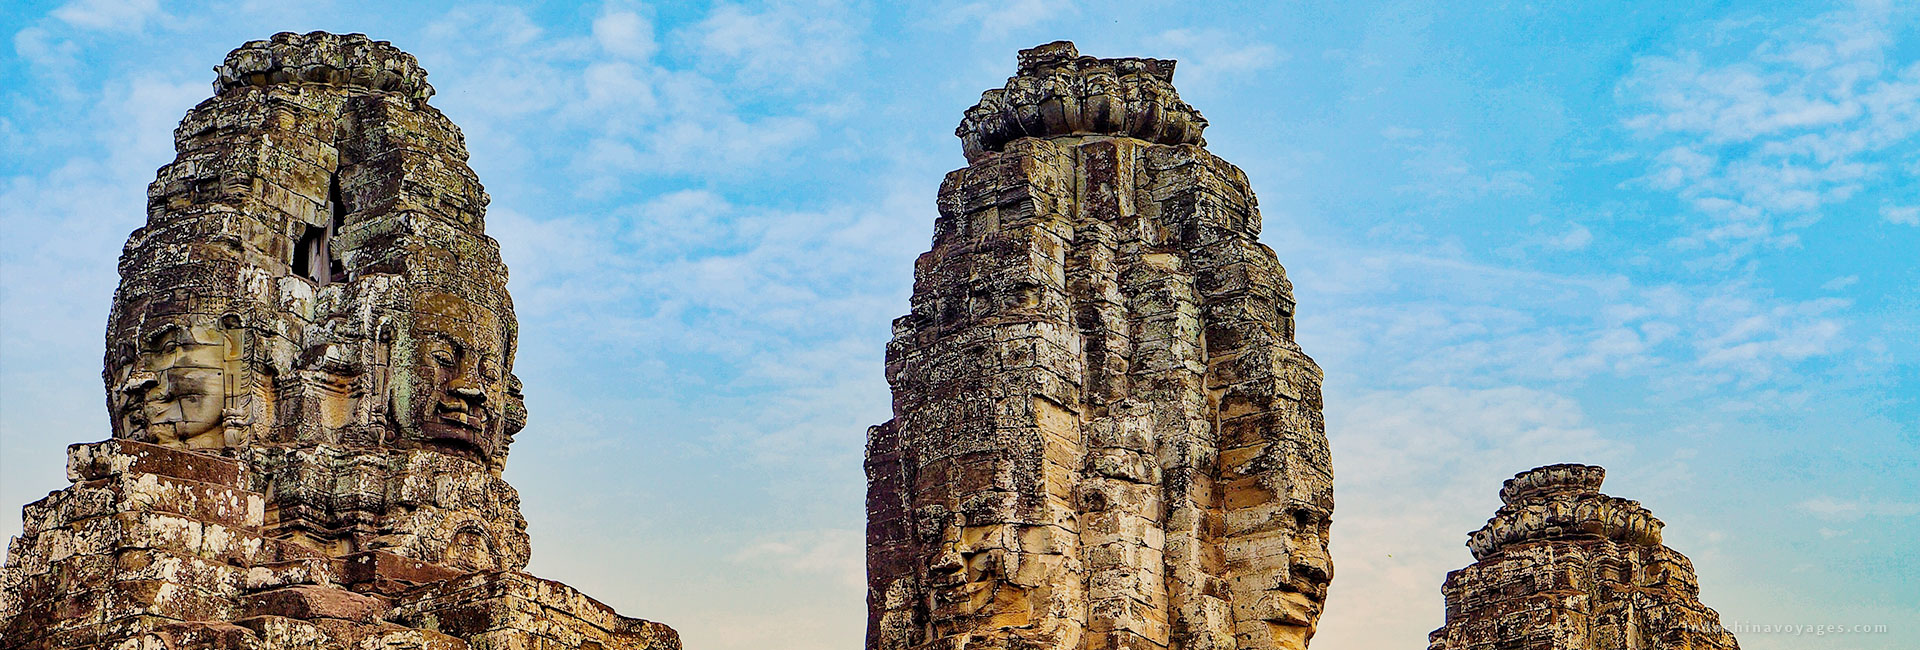 Marvel at the magnificent Angkor Wat and learn more about the Khmer history
